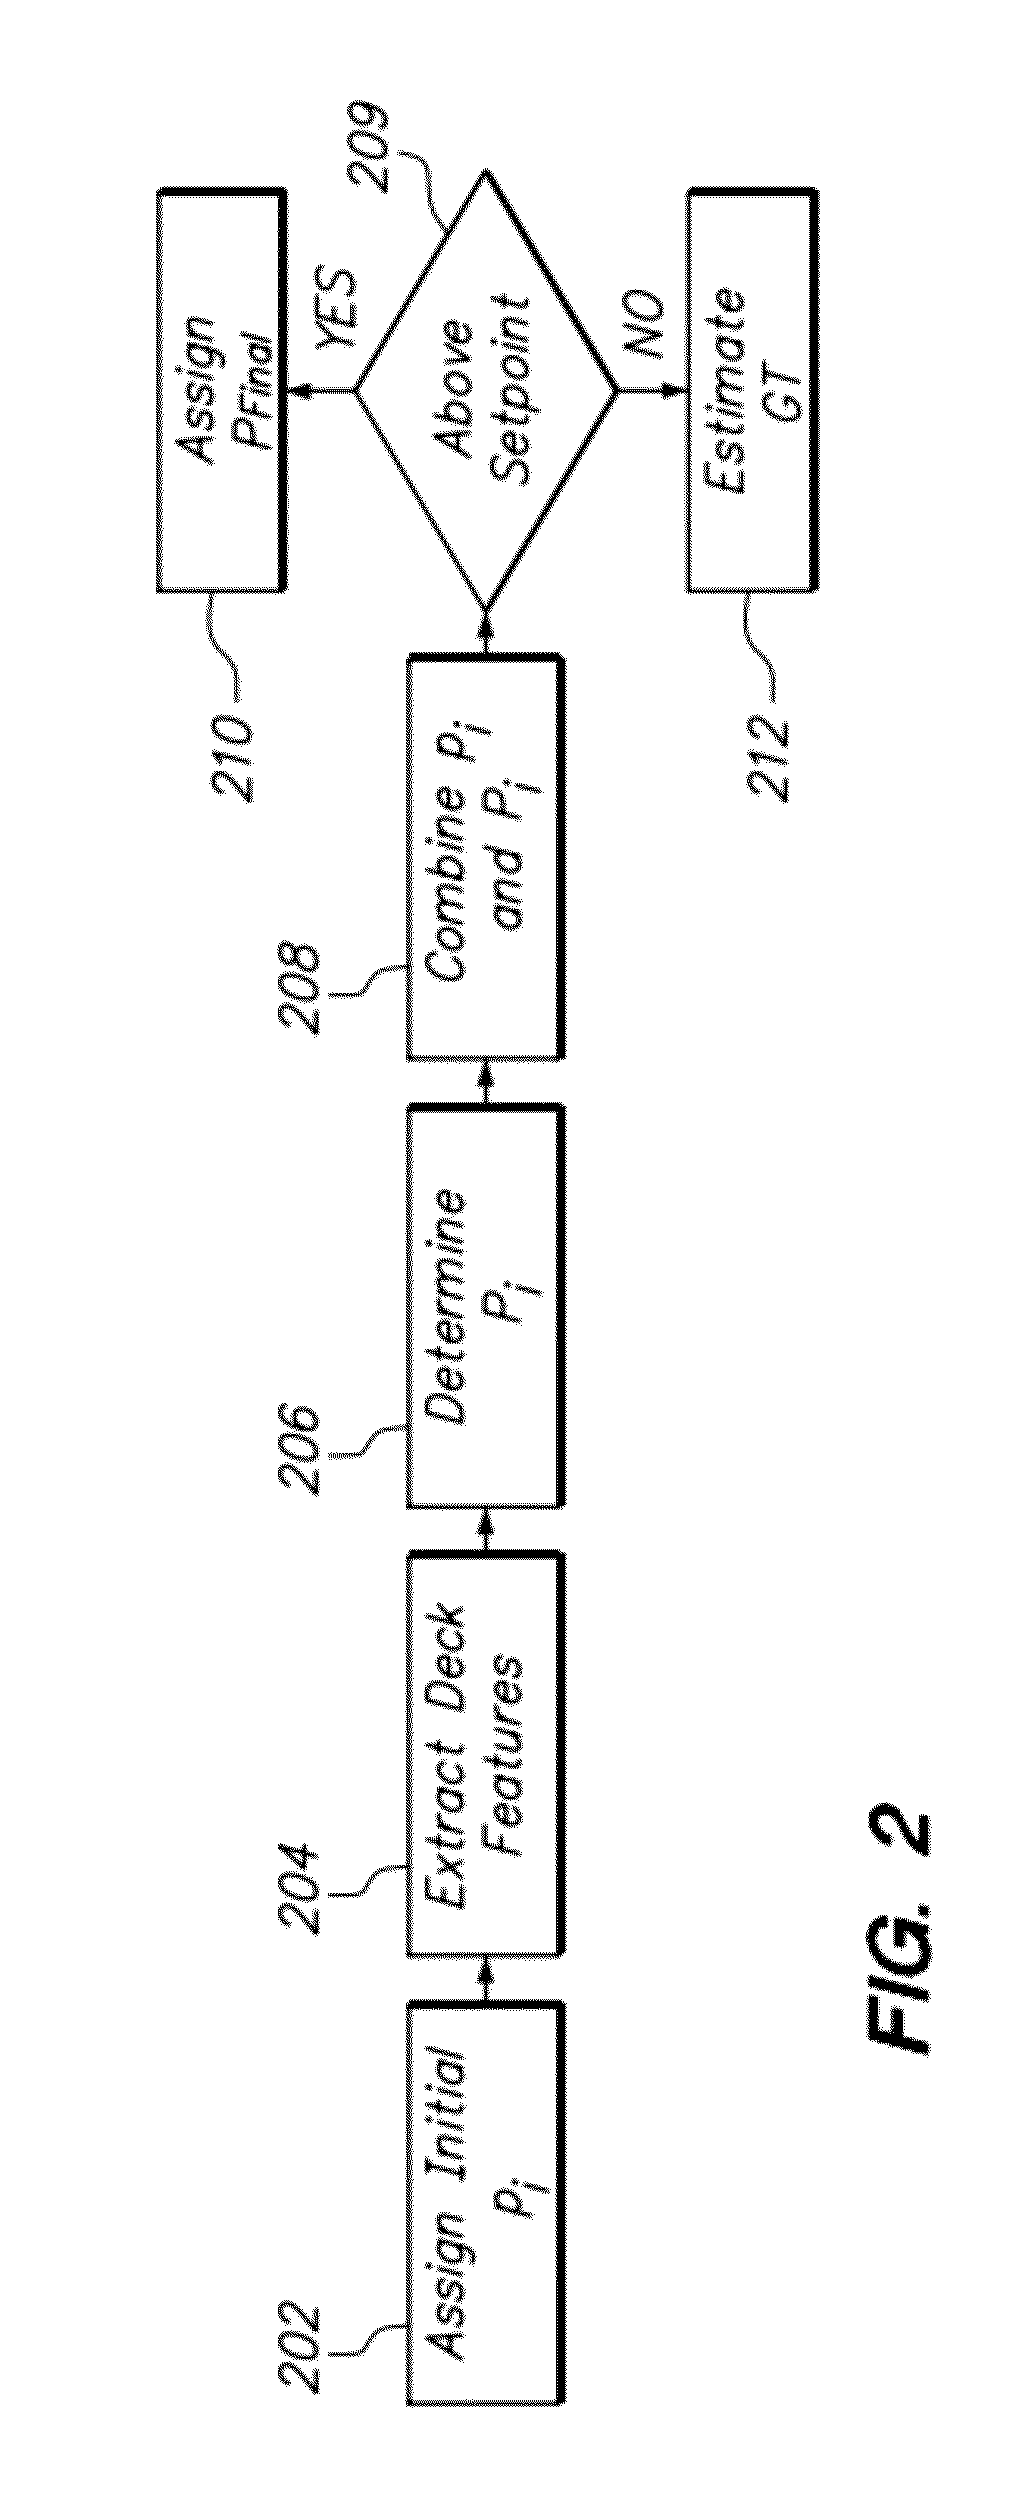 Method for classifying vessels using features extracted from overhead imagery